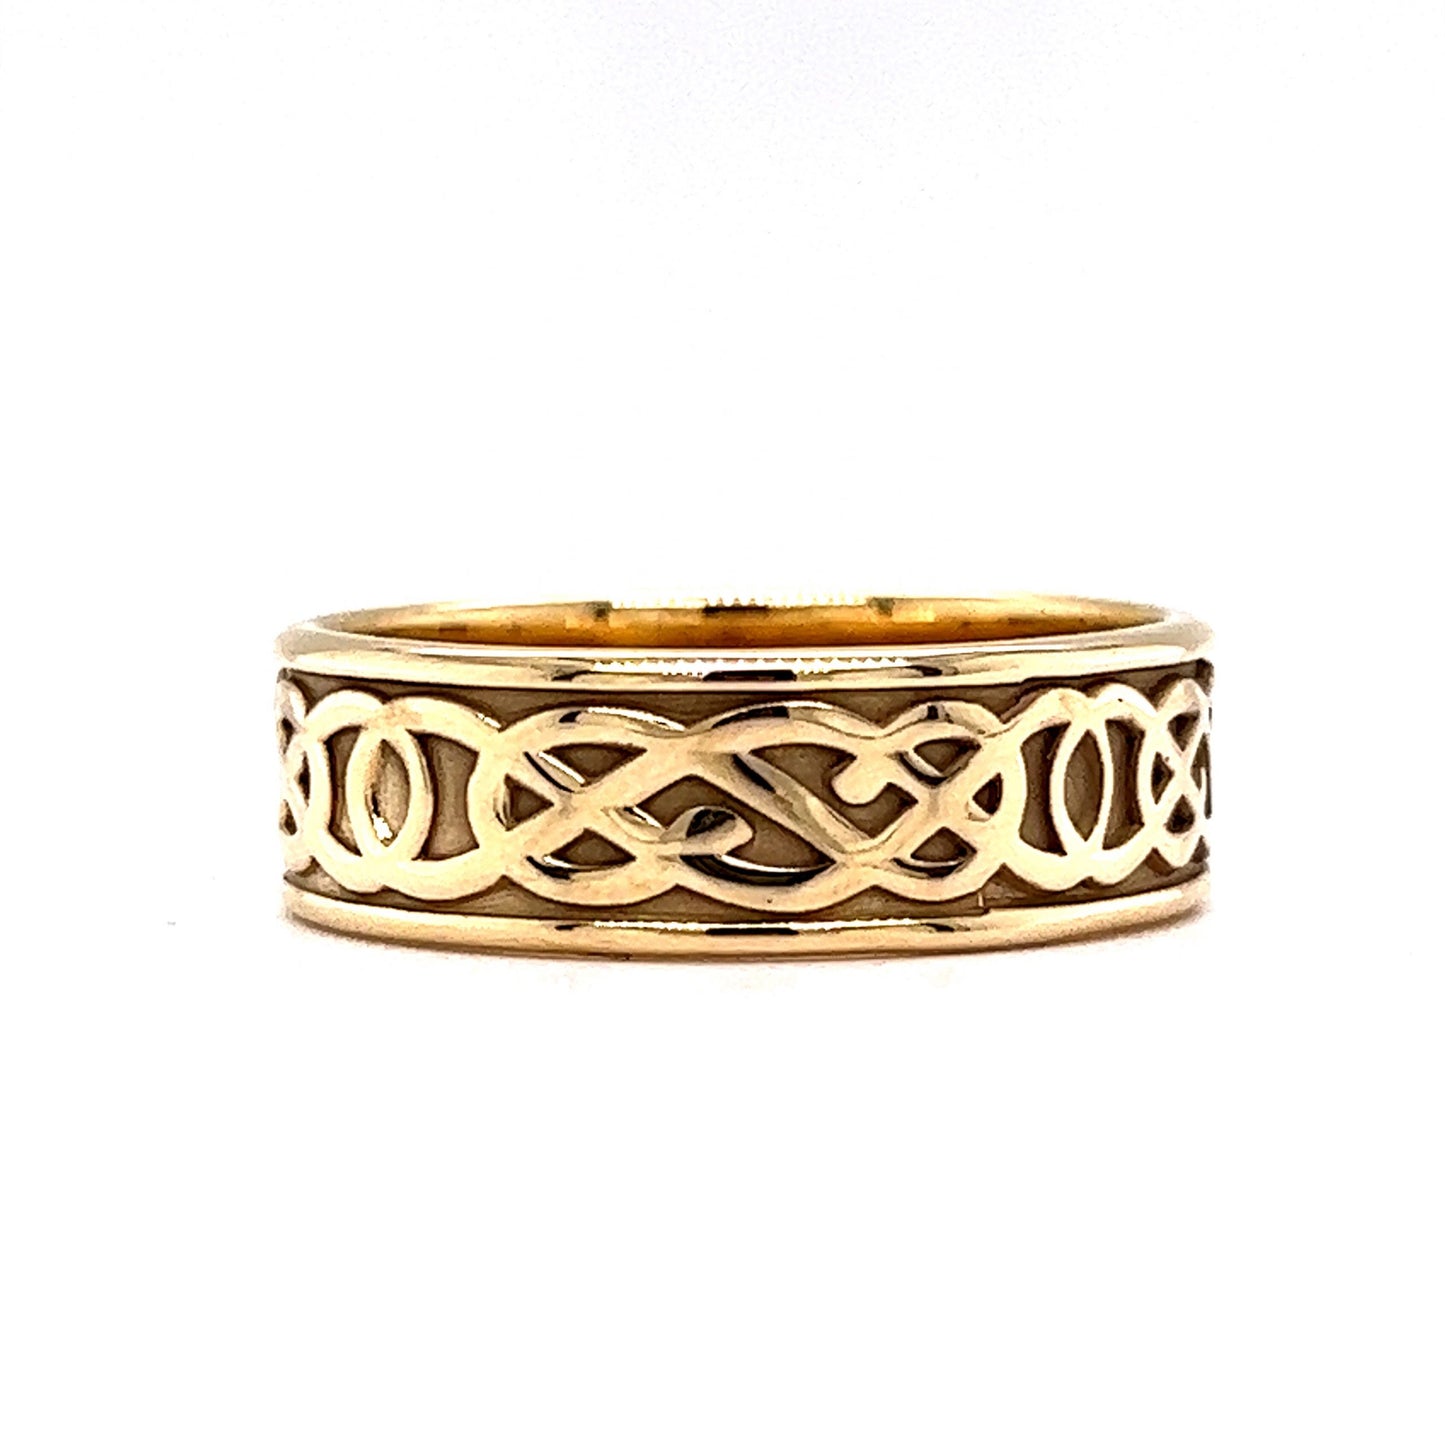 Men's Celtic Engraved Wedding Band in 14k Yellow Gold